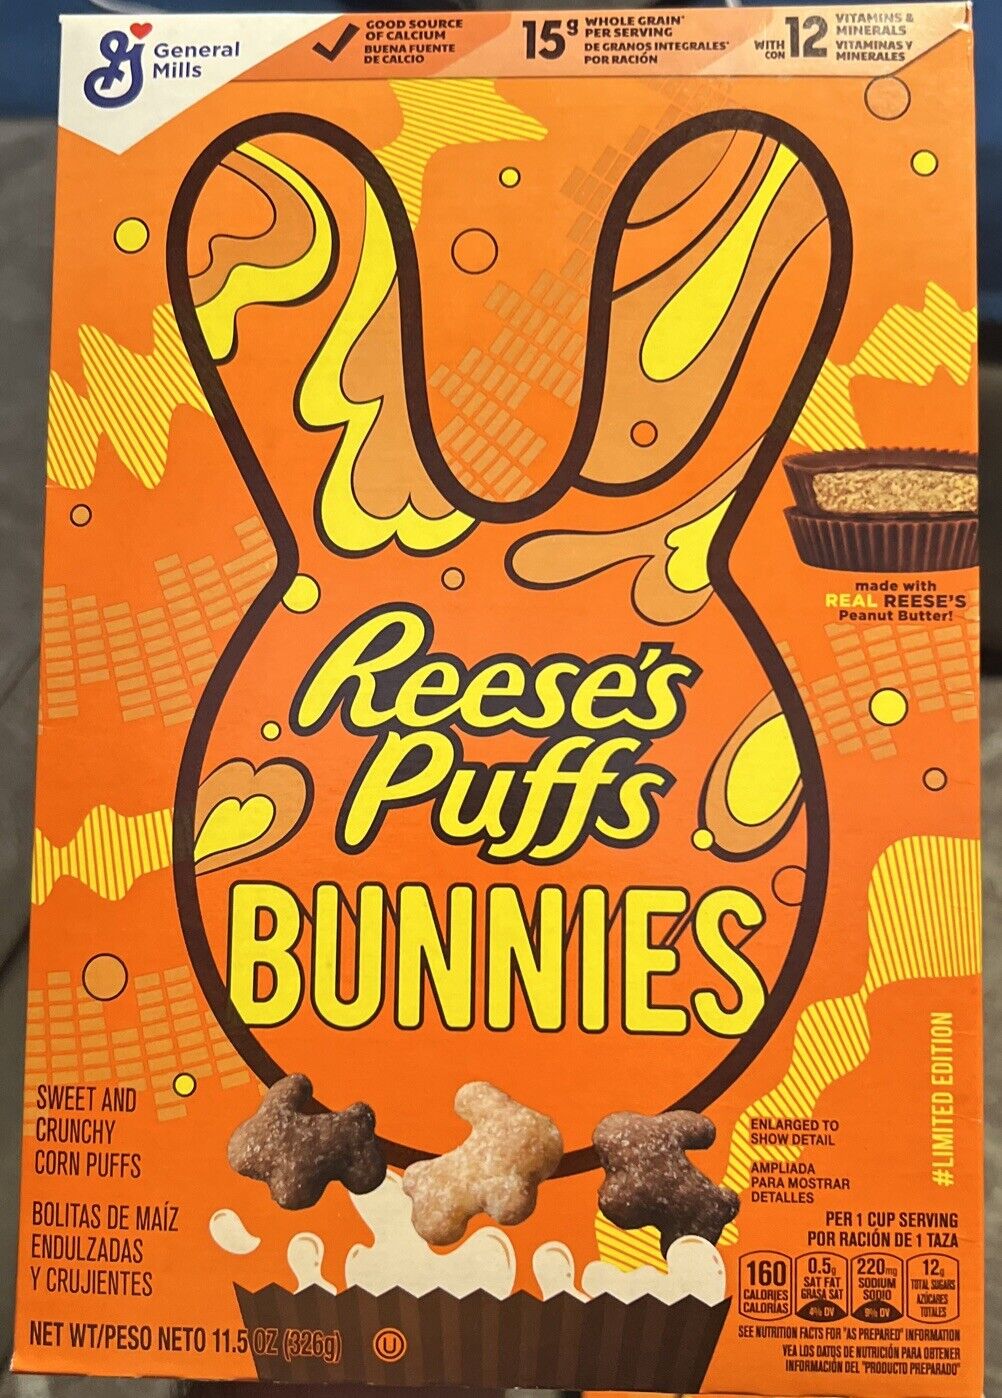 Reese's Puffs - Bunnies - Cereal Box Advertising - Easter - General Mills New